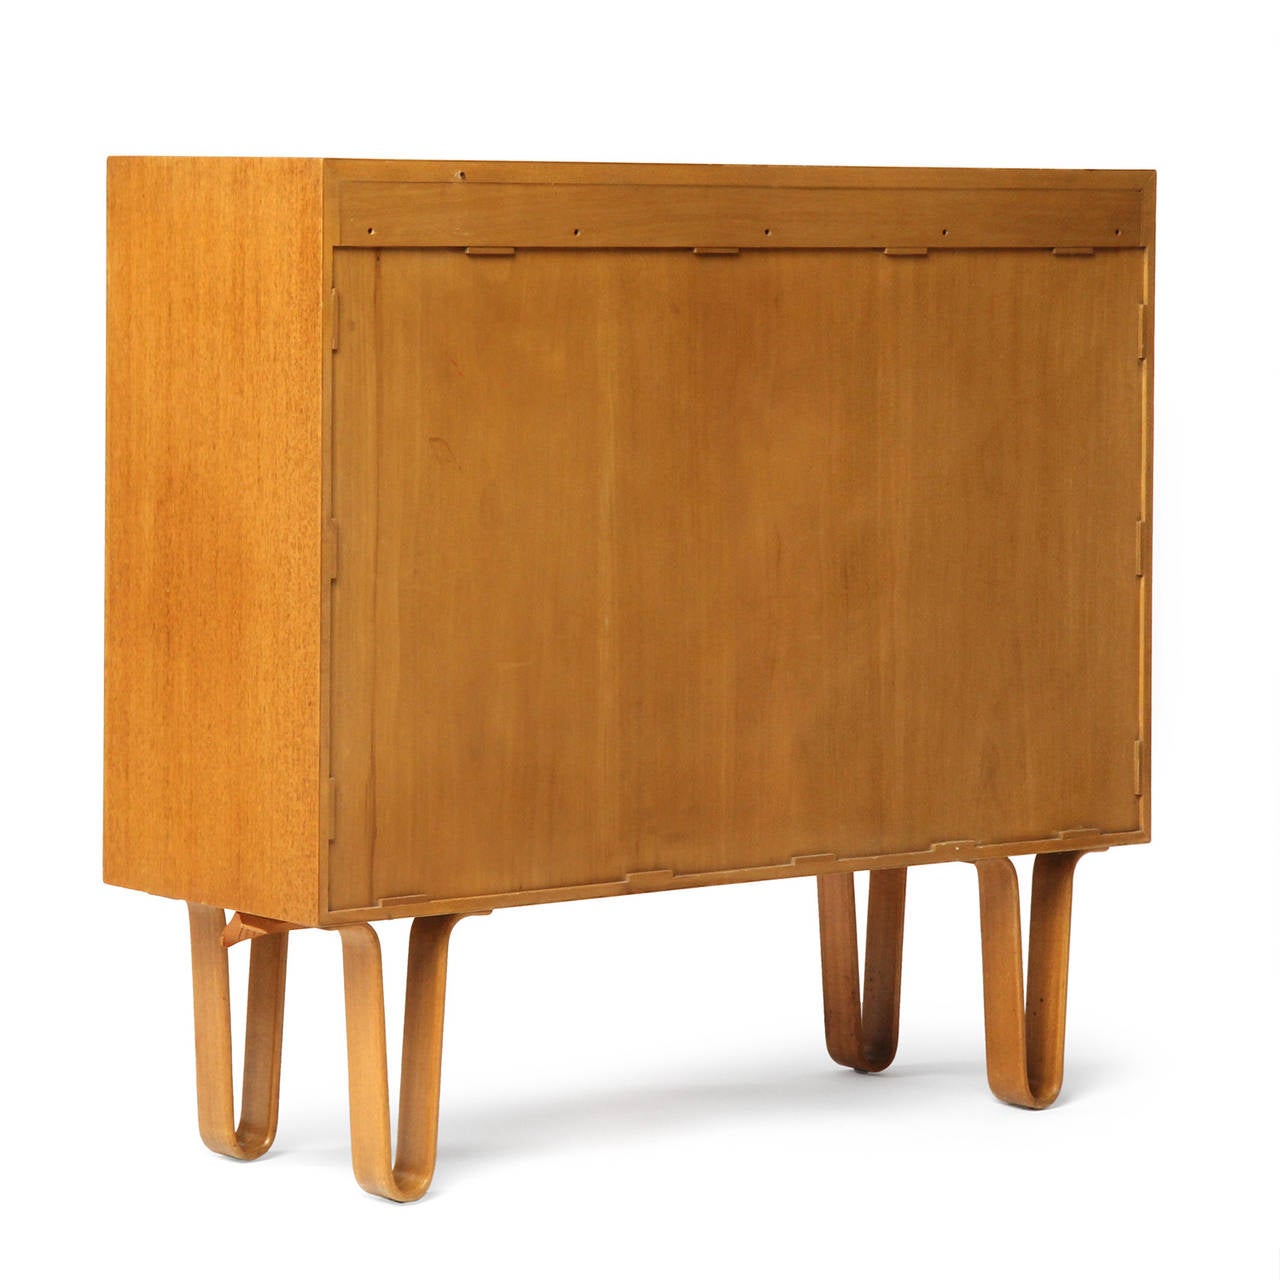 Mid-20th Century Cabinet by Edward Wormley